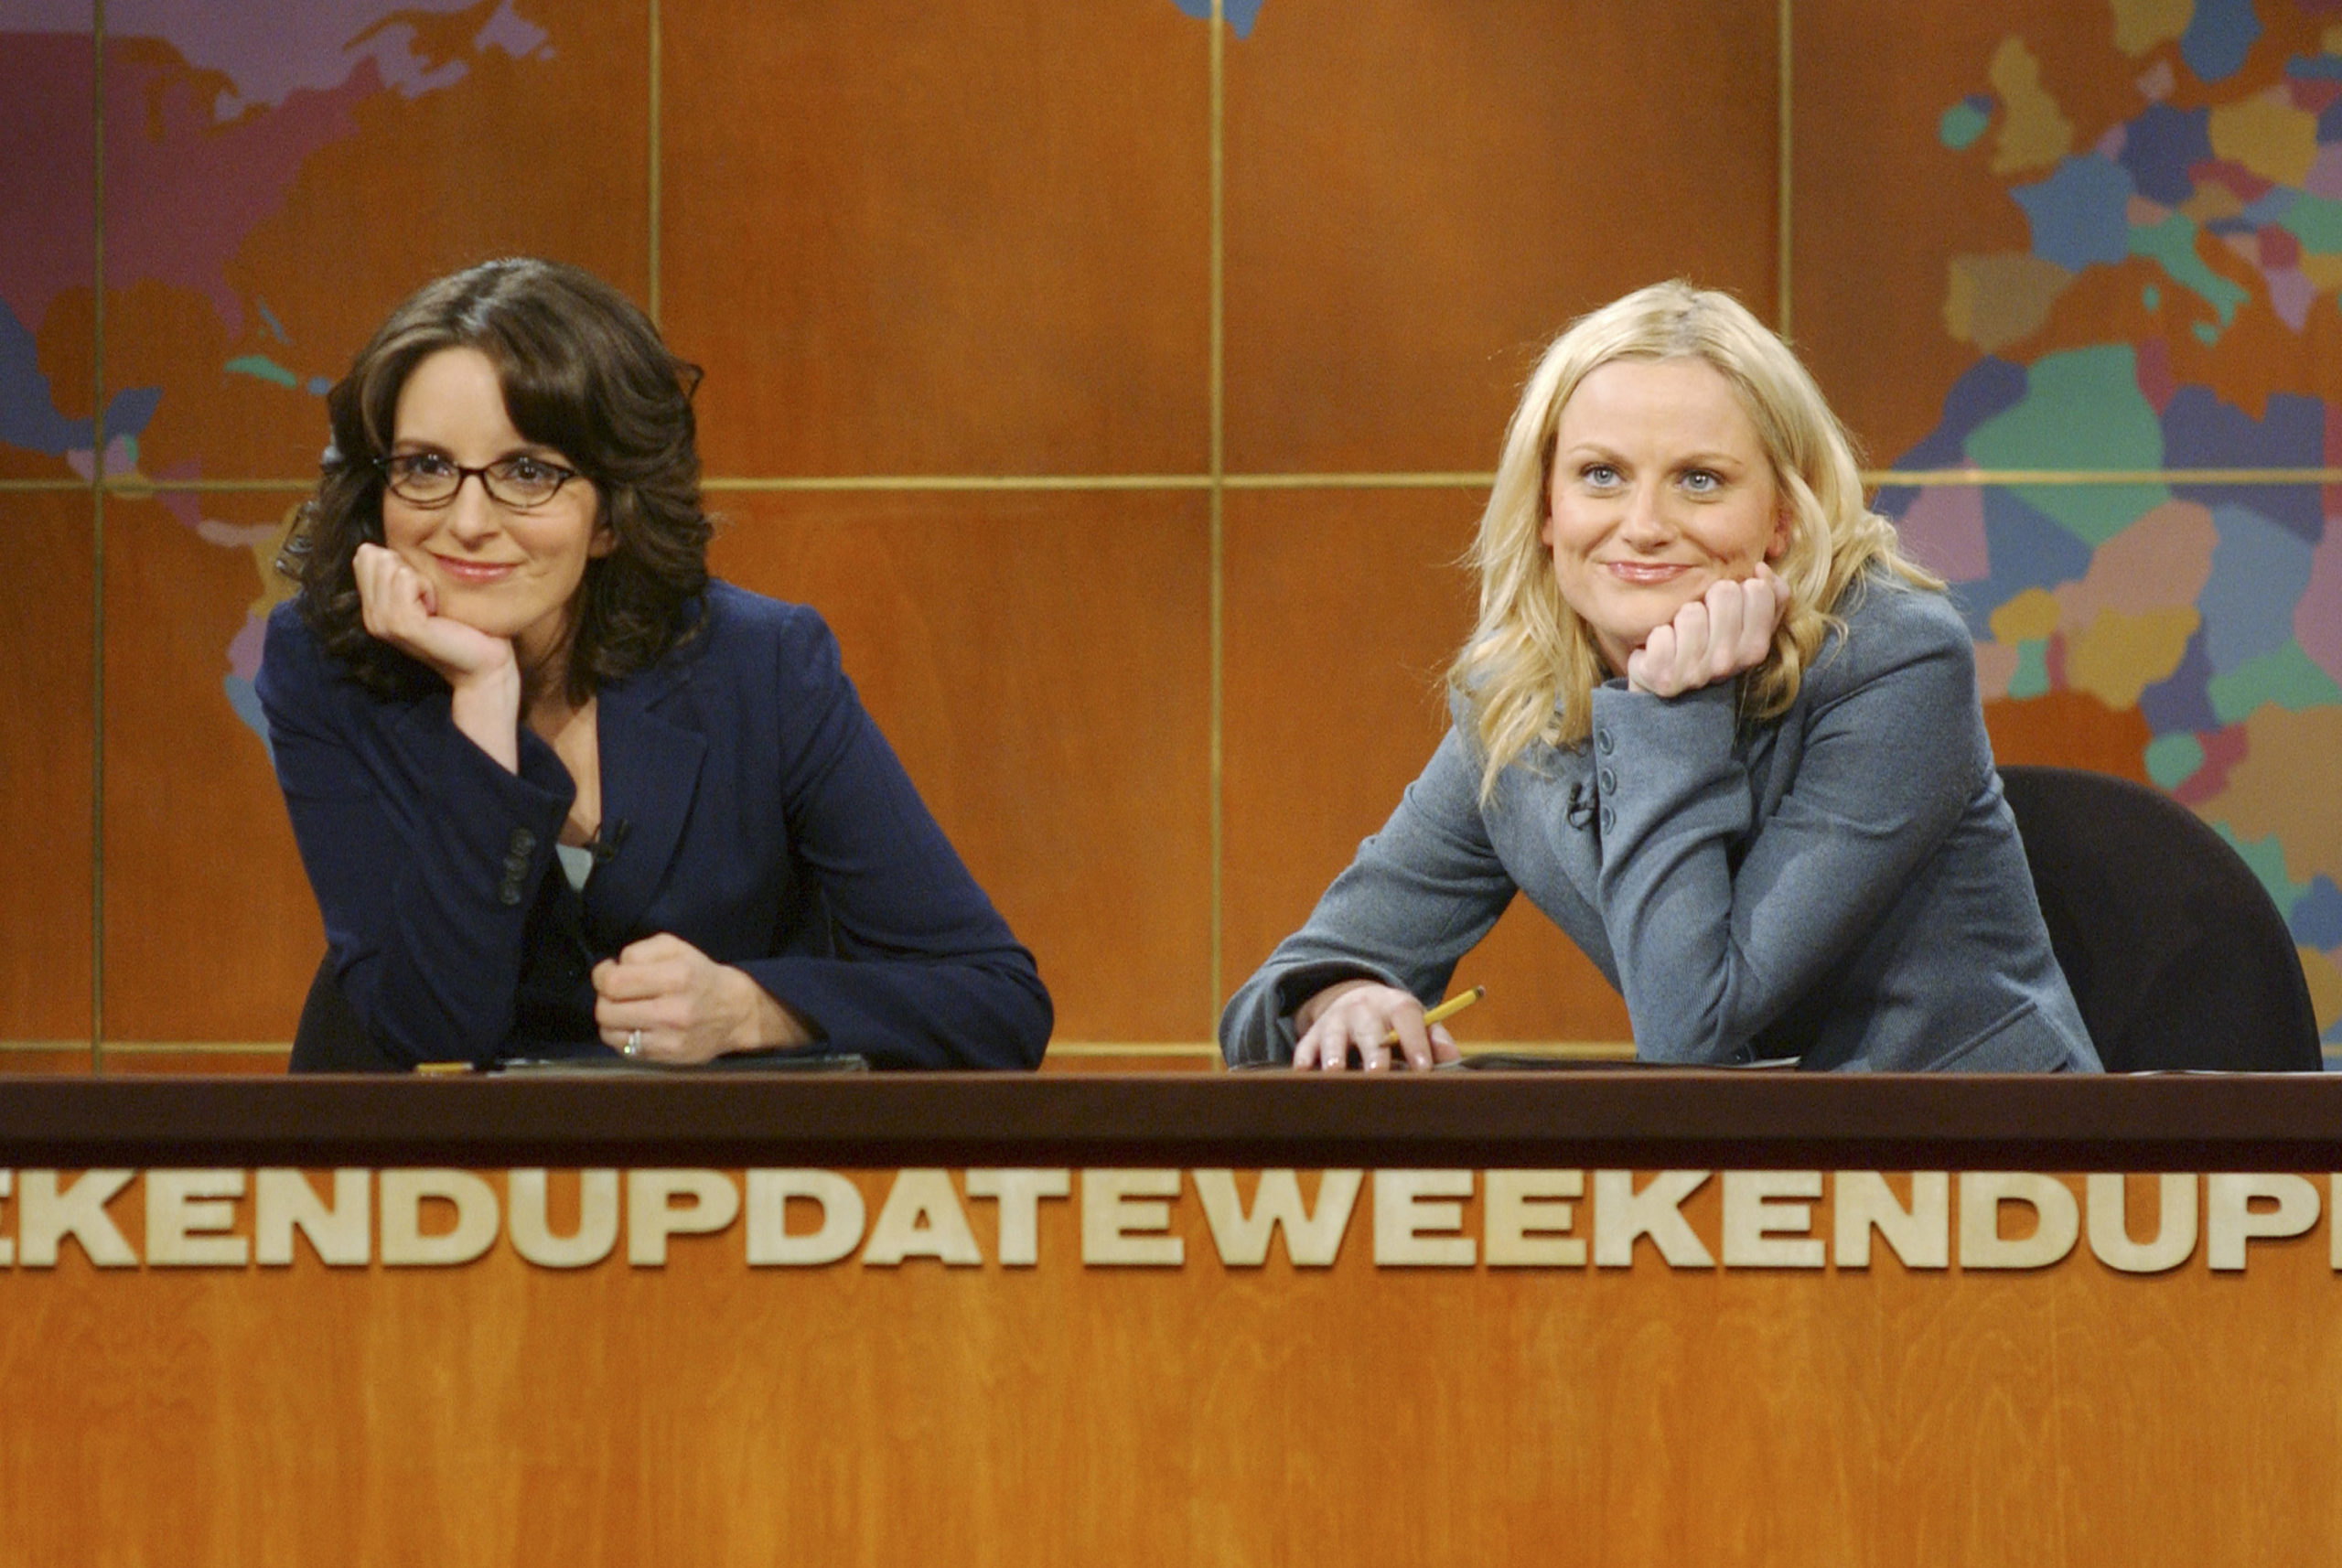 Tina Fey and Amy Poehler during Weekend Update in February 2006